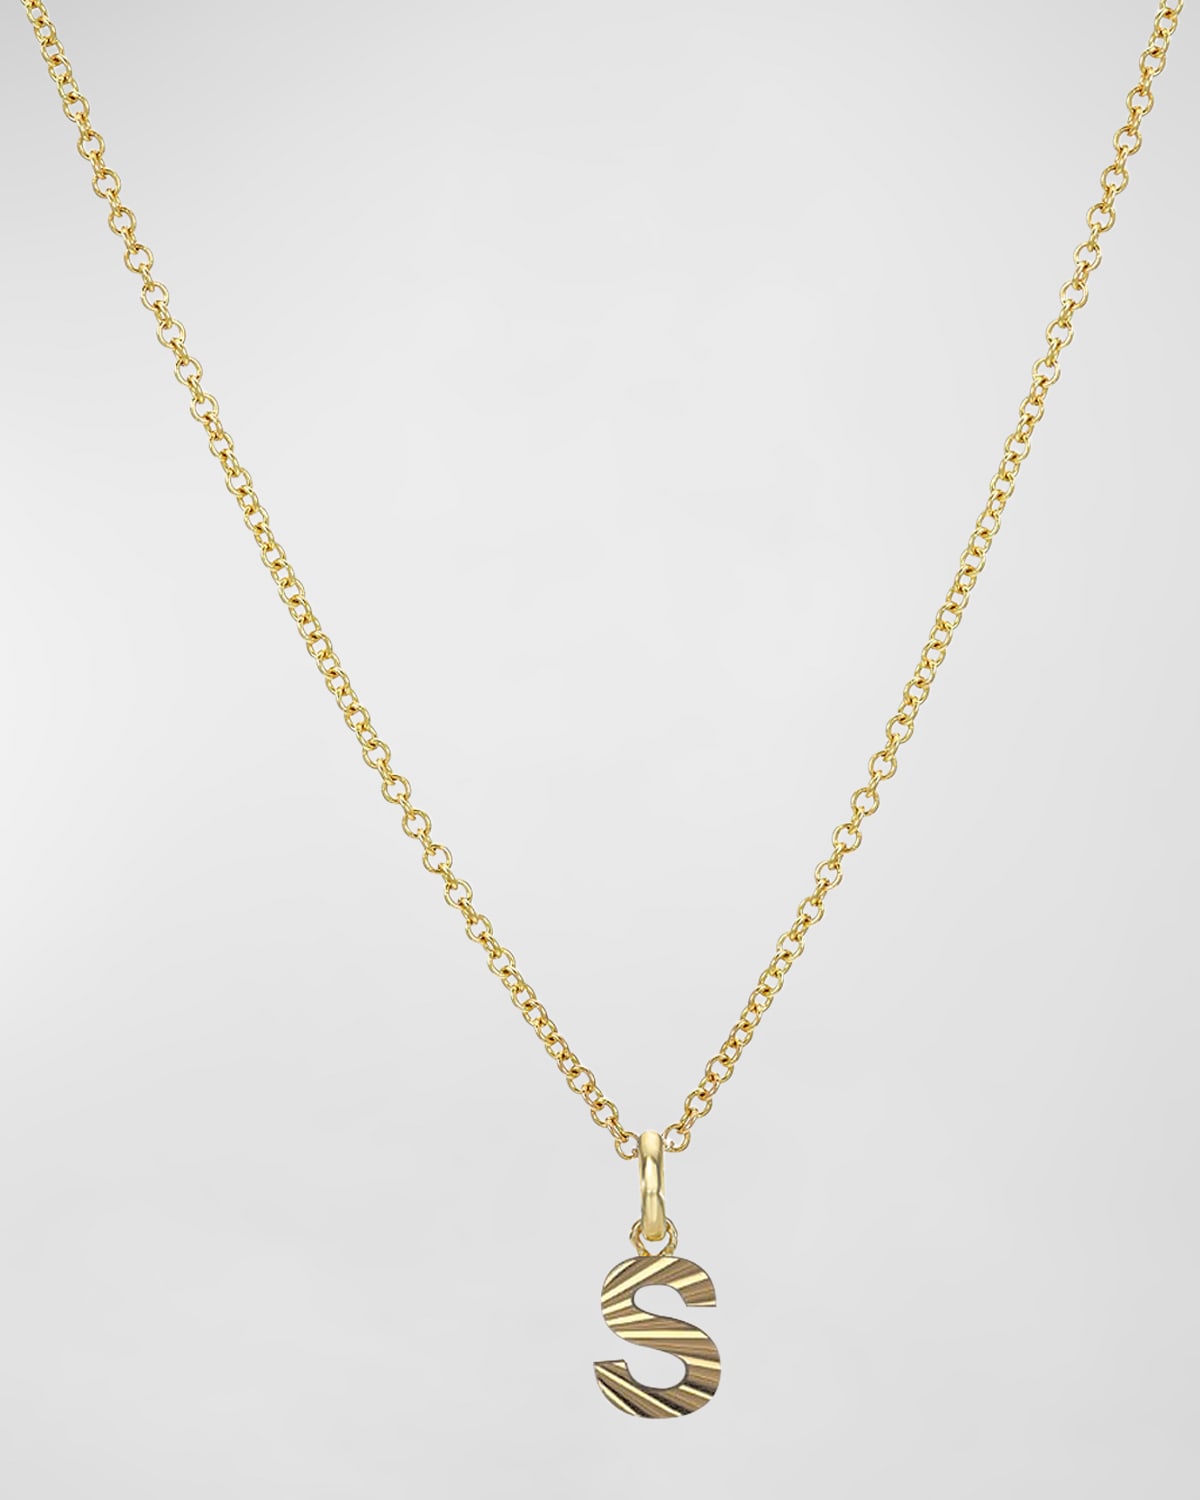 Zoe Lev Jewelry 14k Gold Initial Pendant Necklace In S